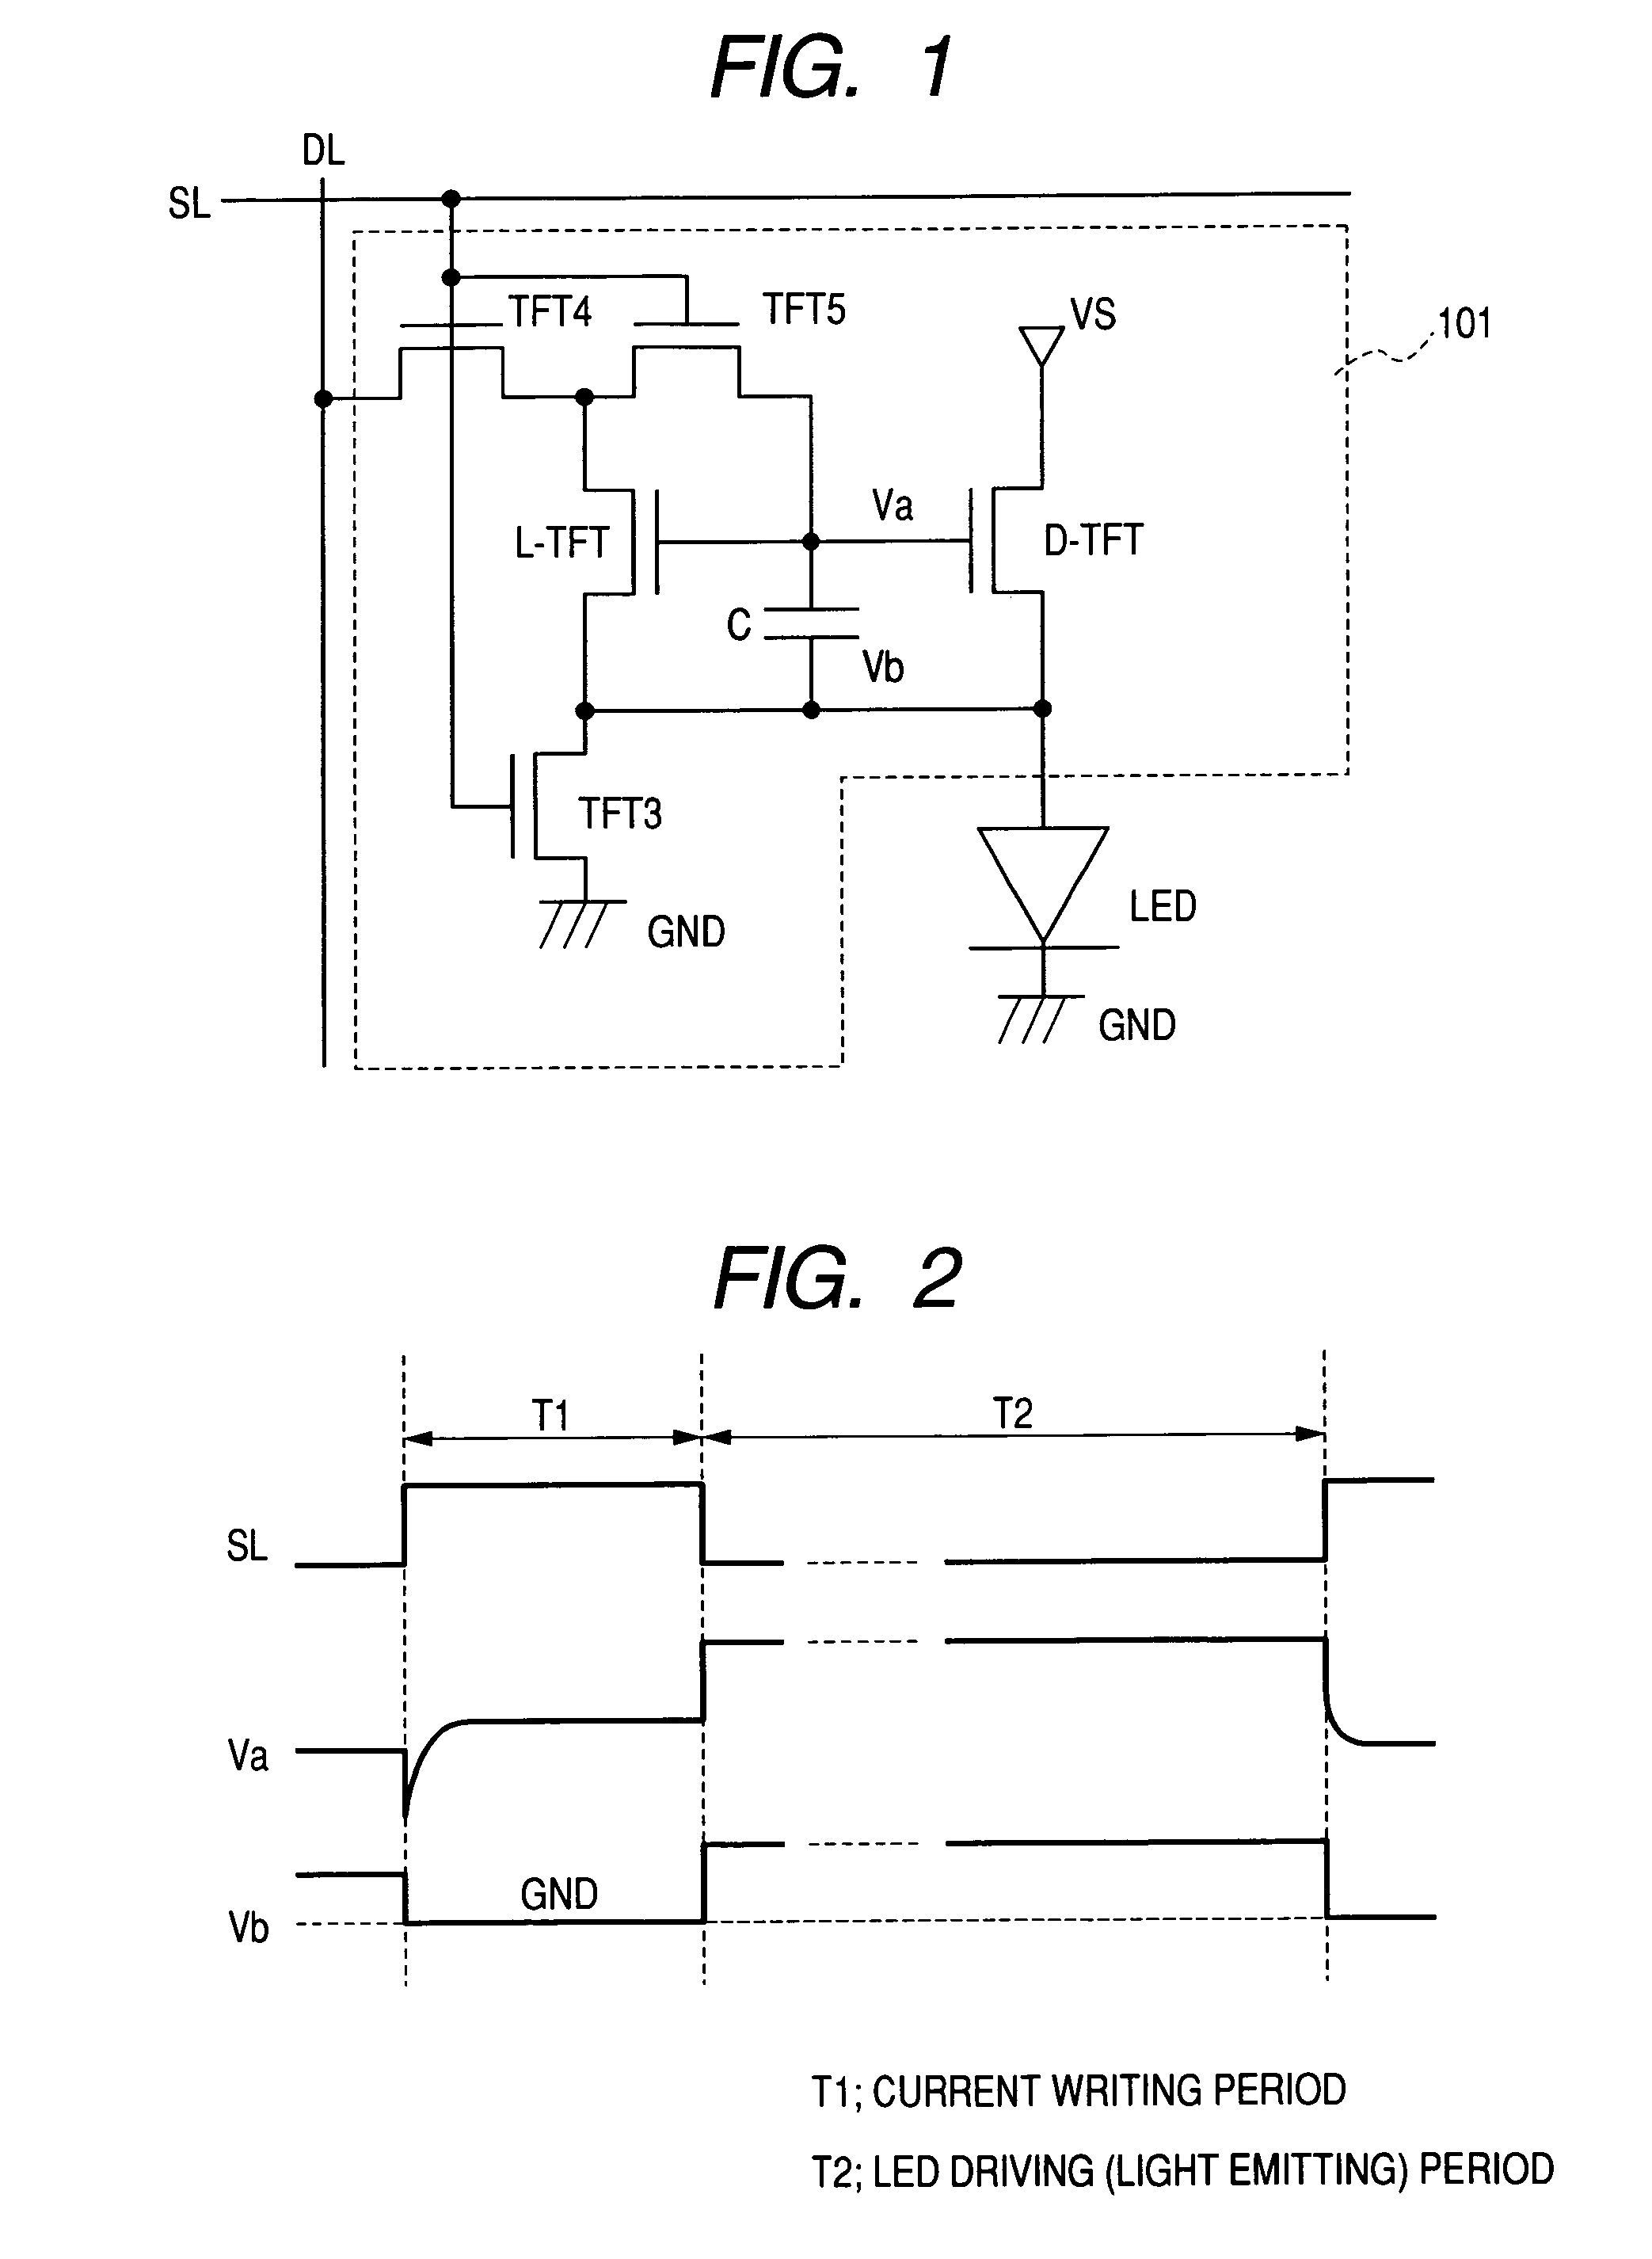 Light emitting display device with first and second transistor films and capacitor with large capacitance value